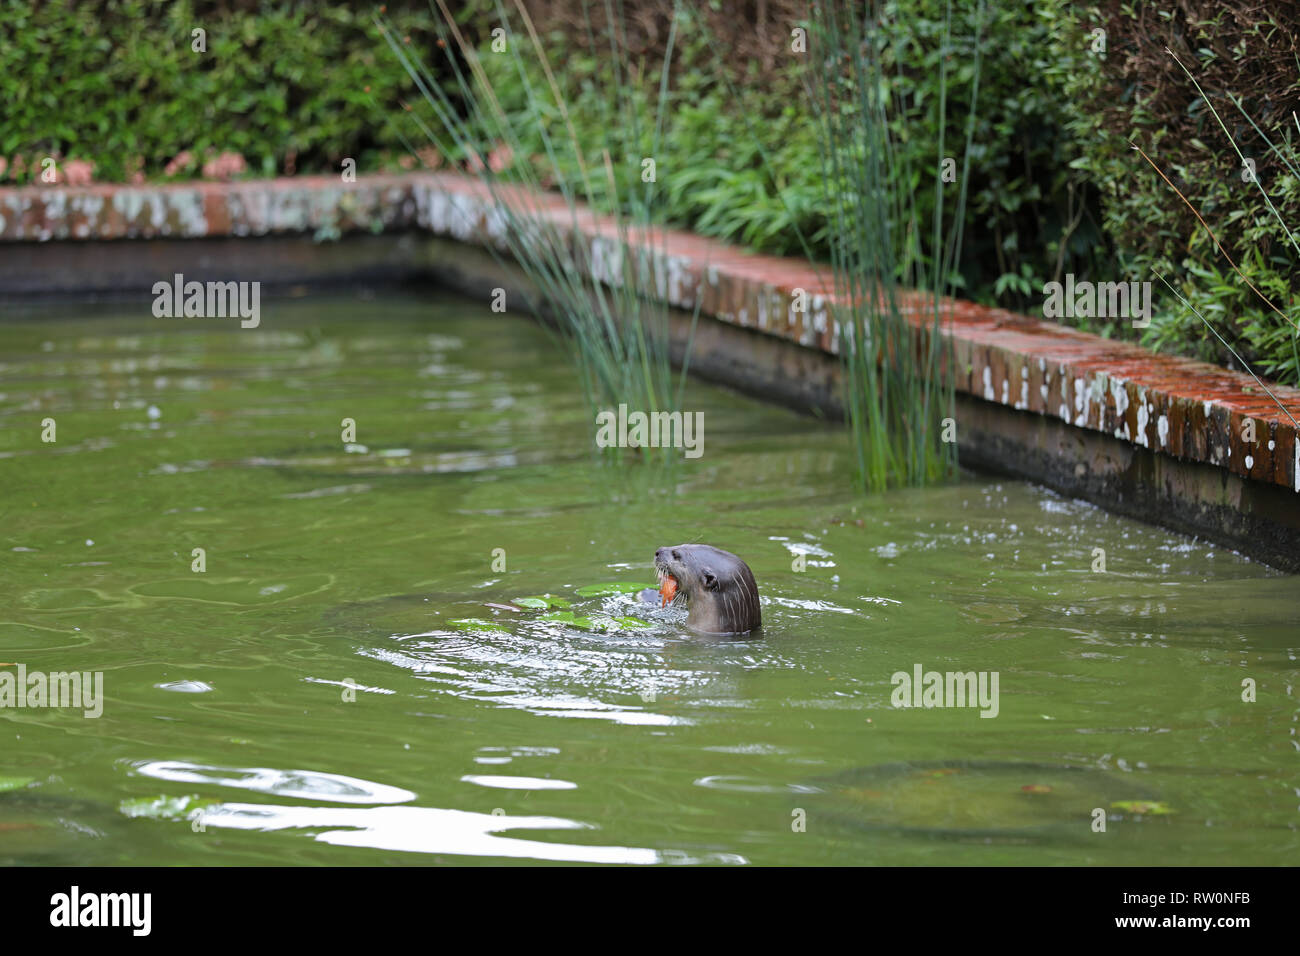 Otter in Singapore Stock Photo